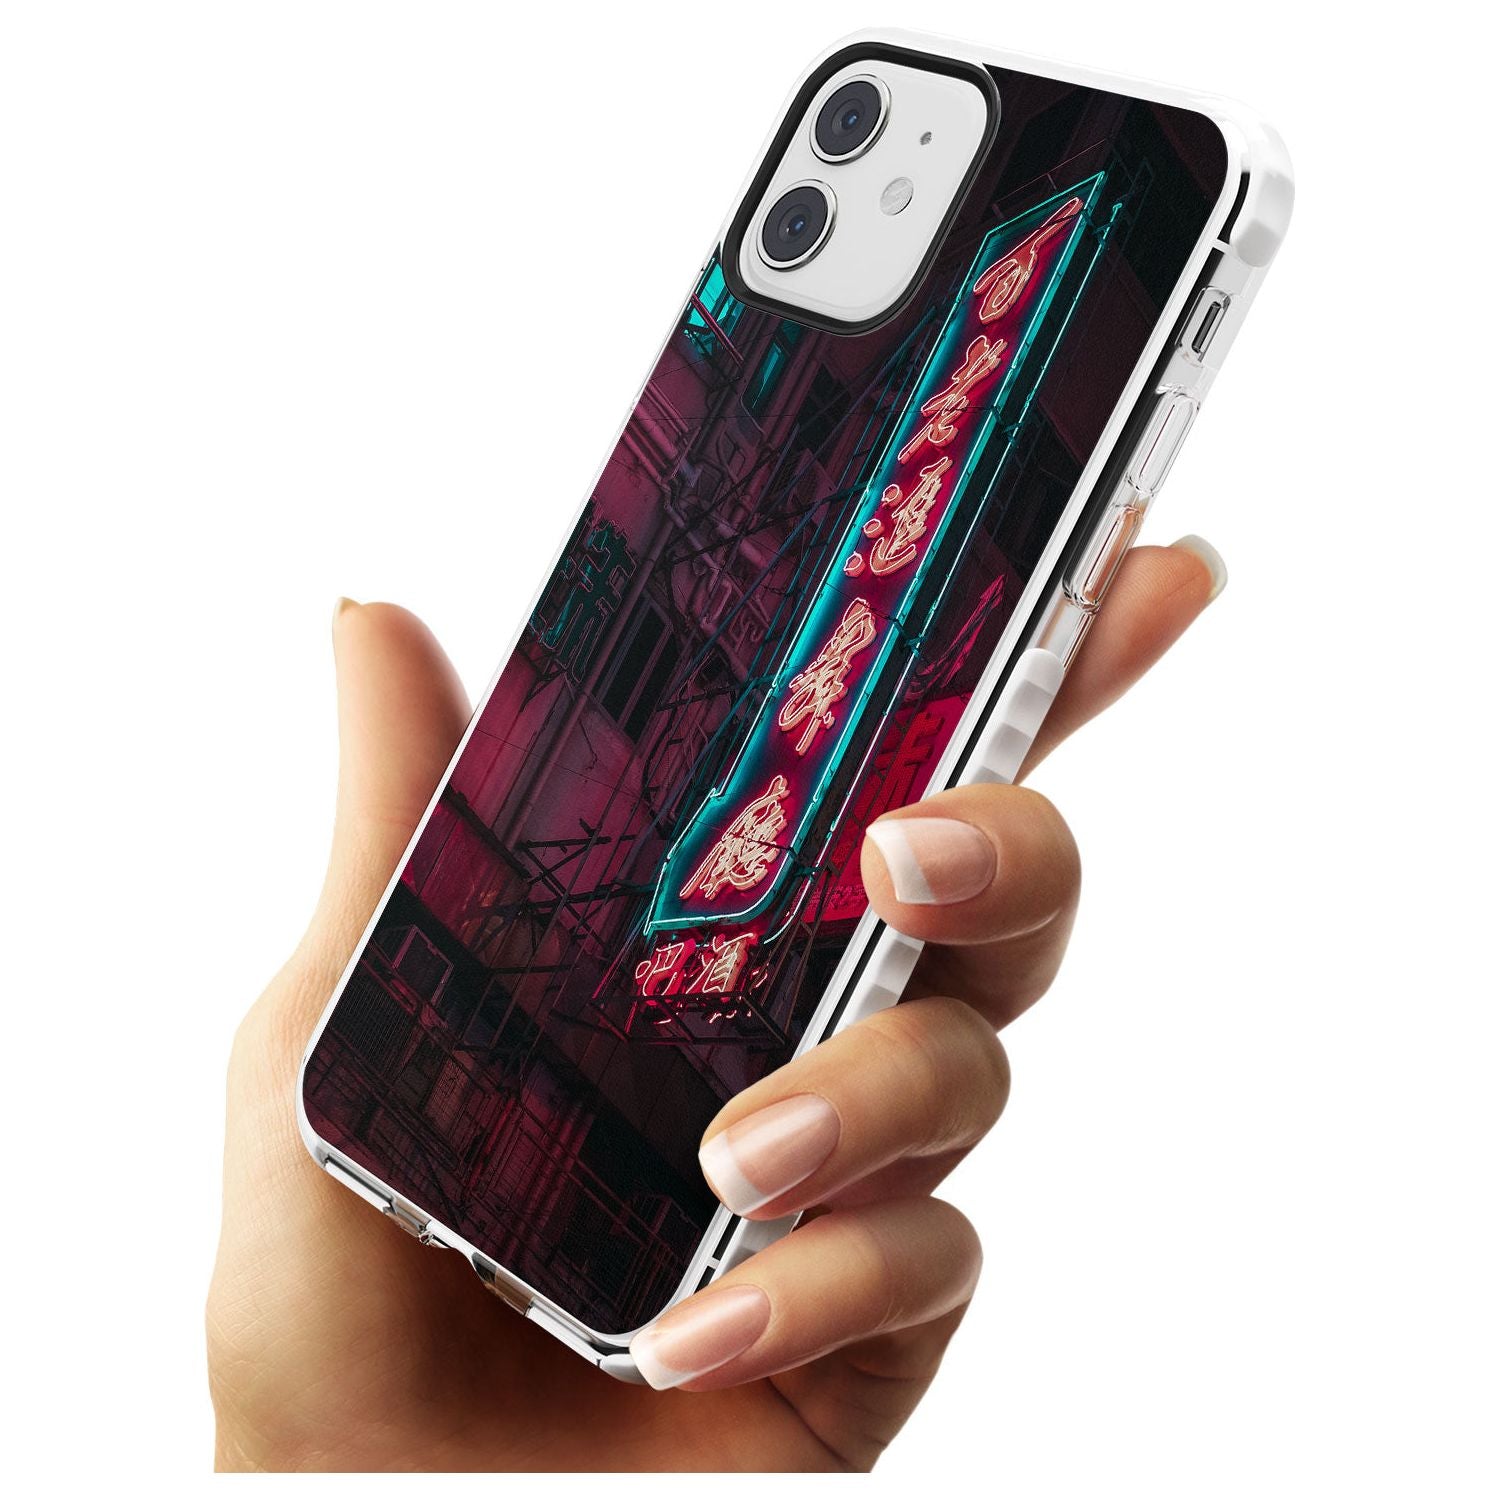 Large Kanji Sign - Neon Cities Photographs Impact Phone Case for iPhone 11